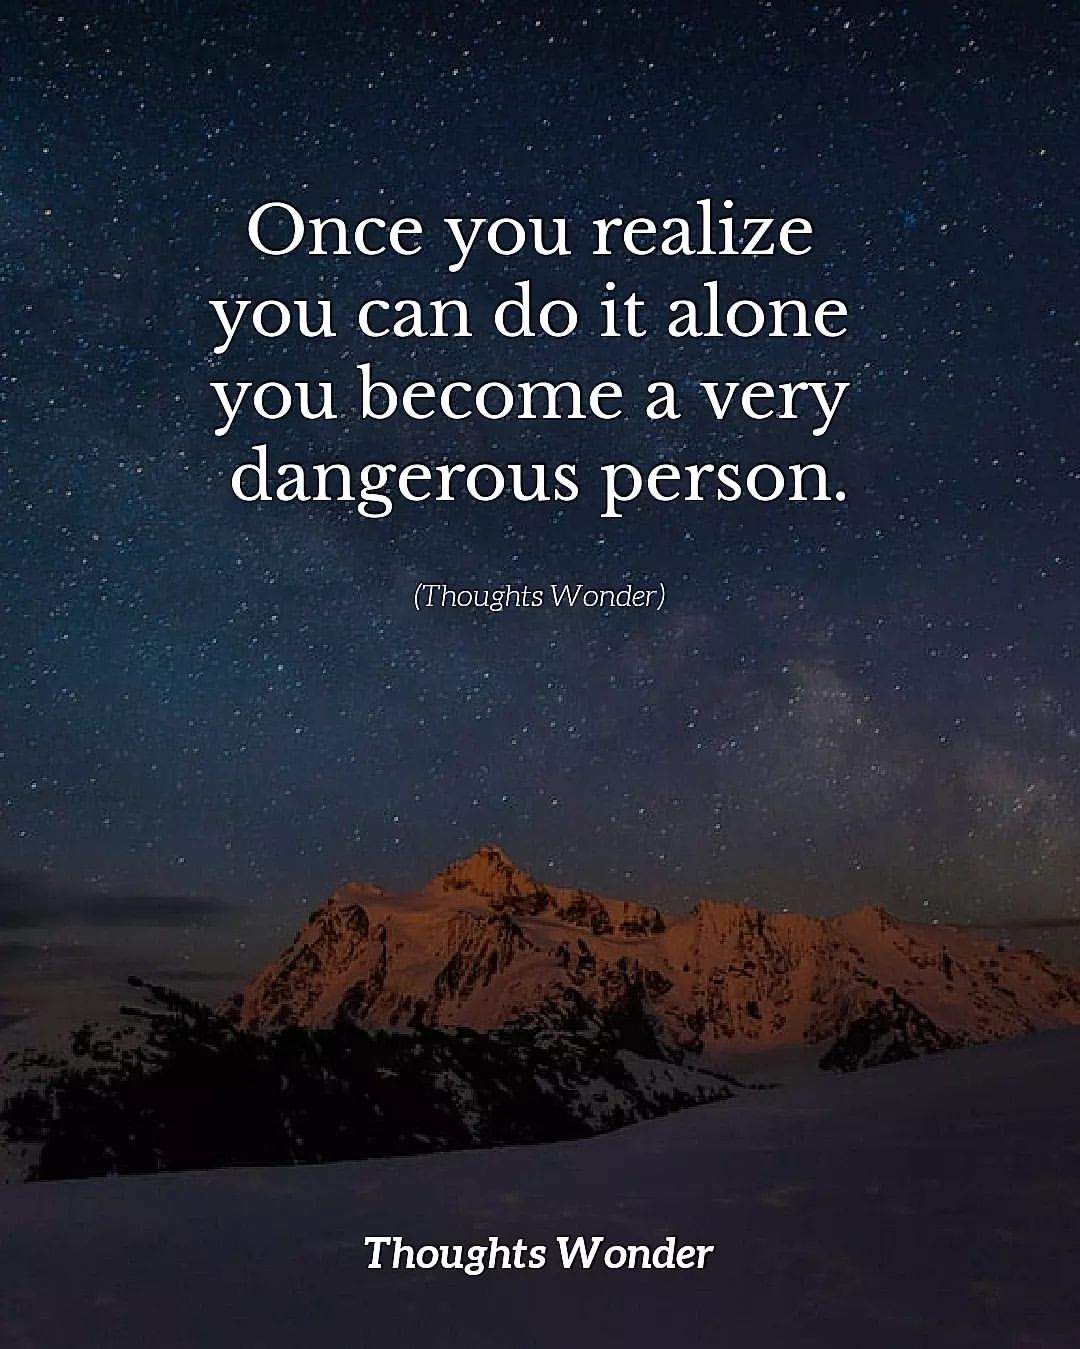 Once you realize you can do it alone you become a very dangerous person.